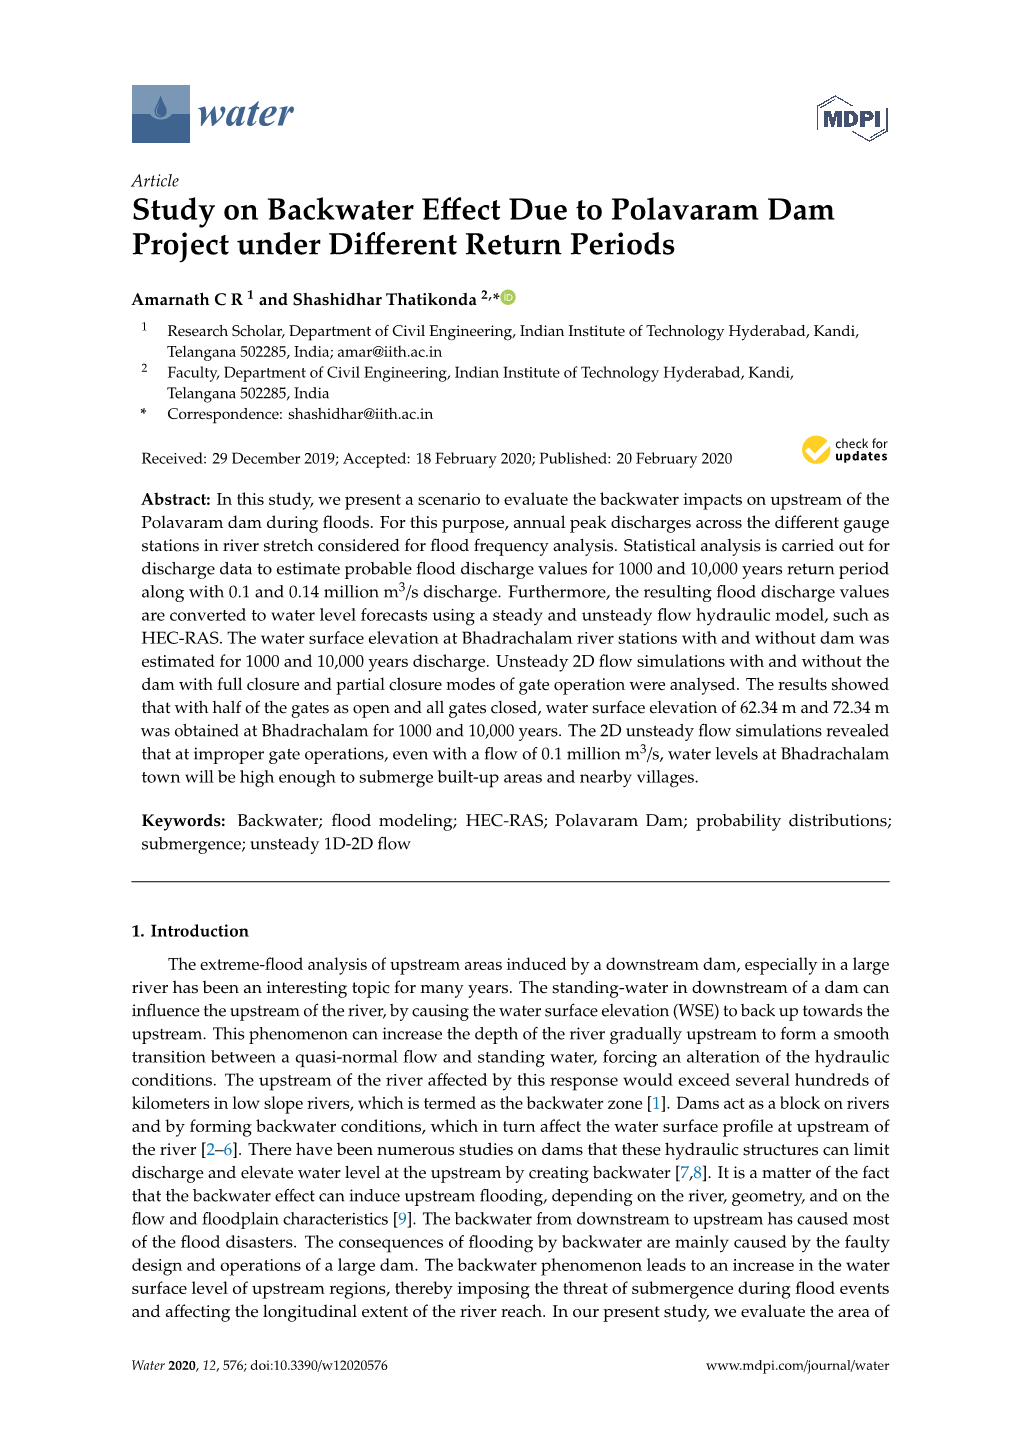 Study on Backwater Effect Due to Polavaram Dam Project Under Different Return Periods